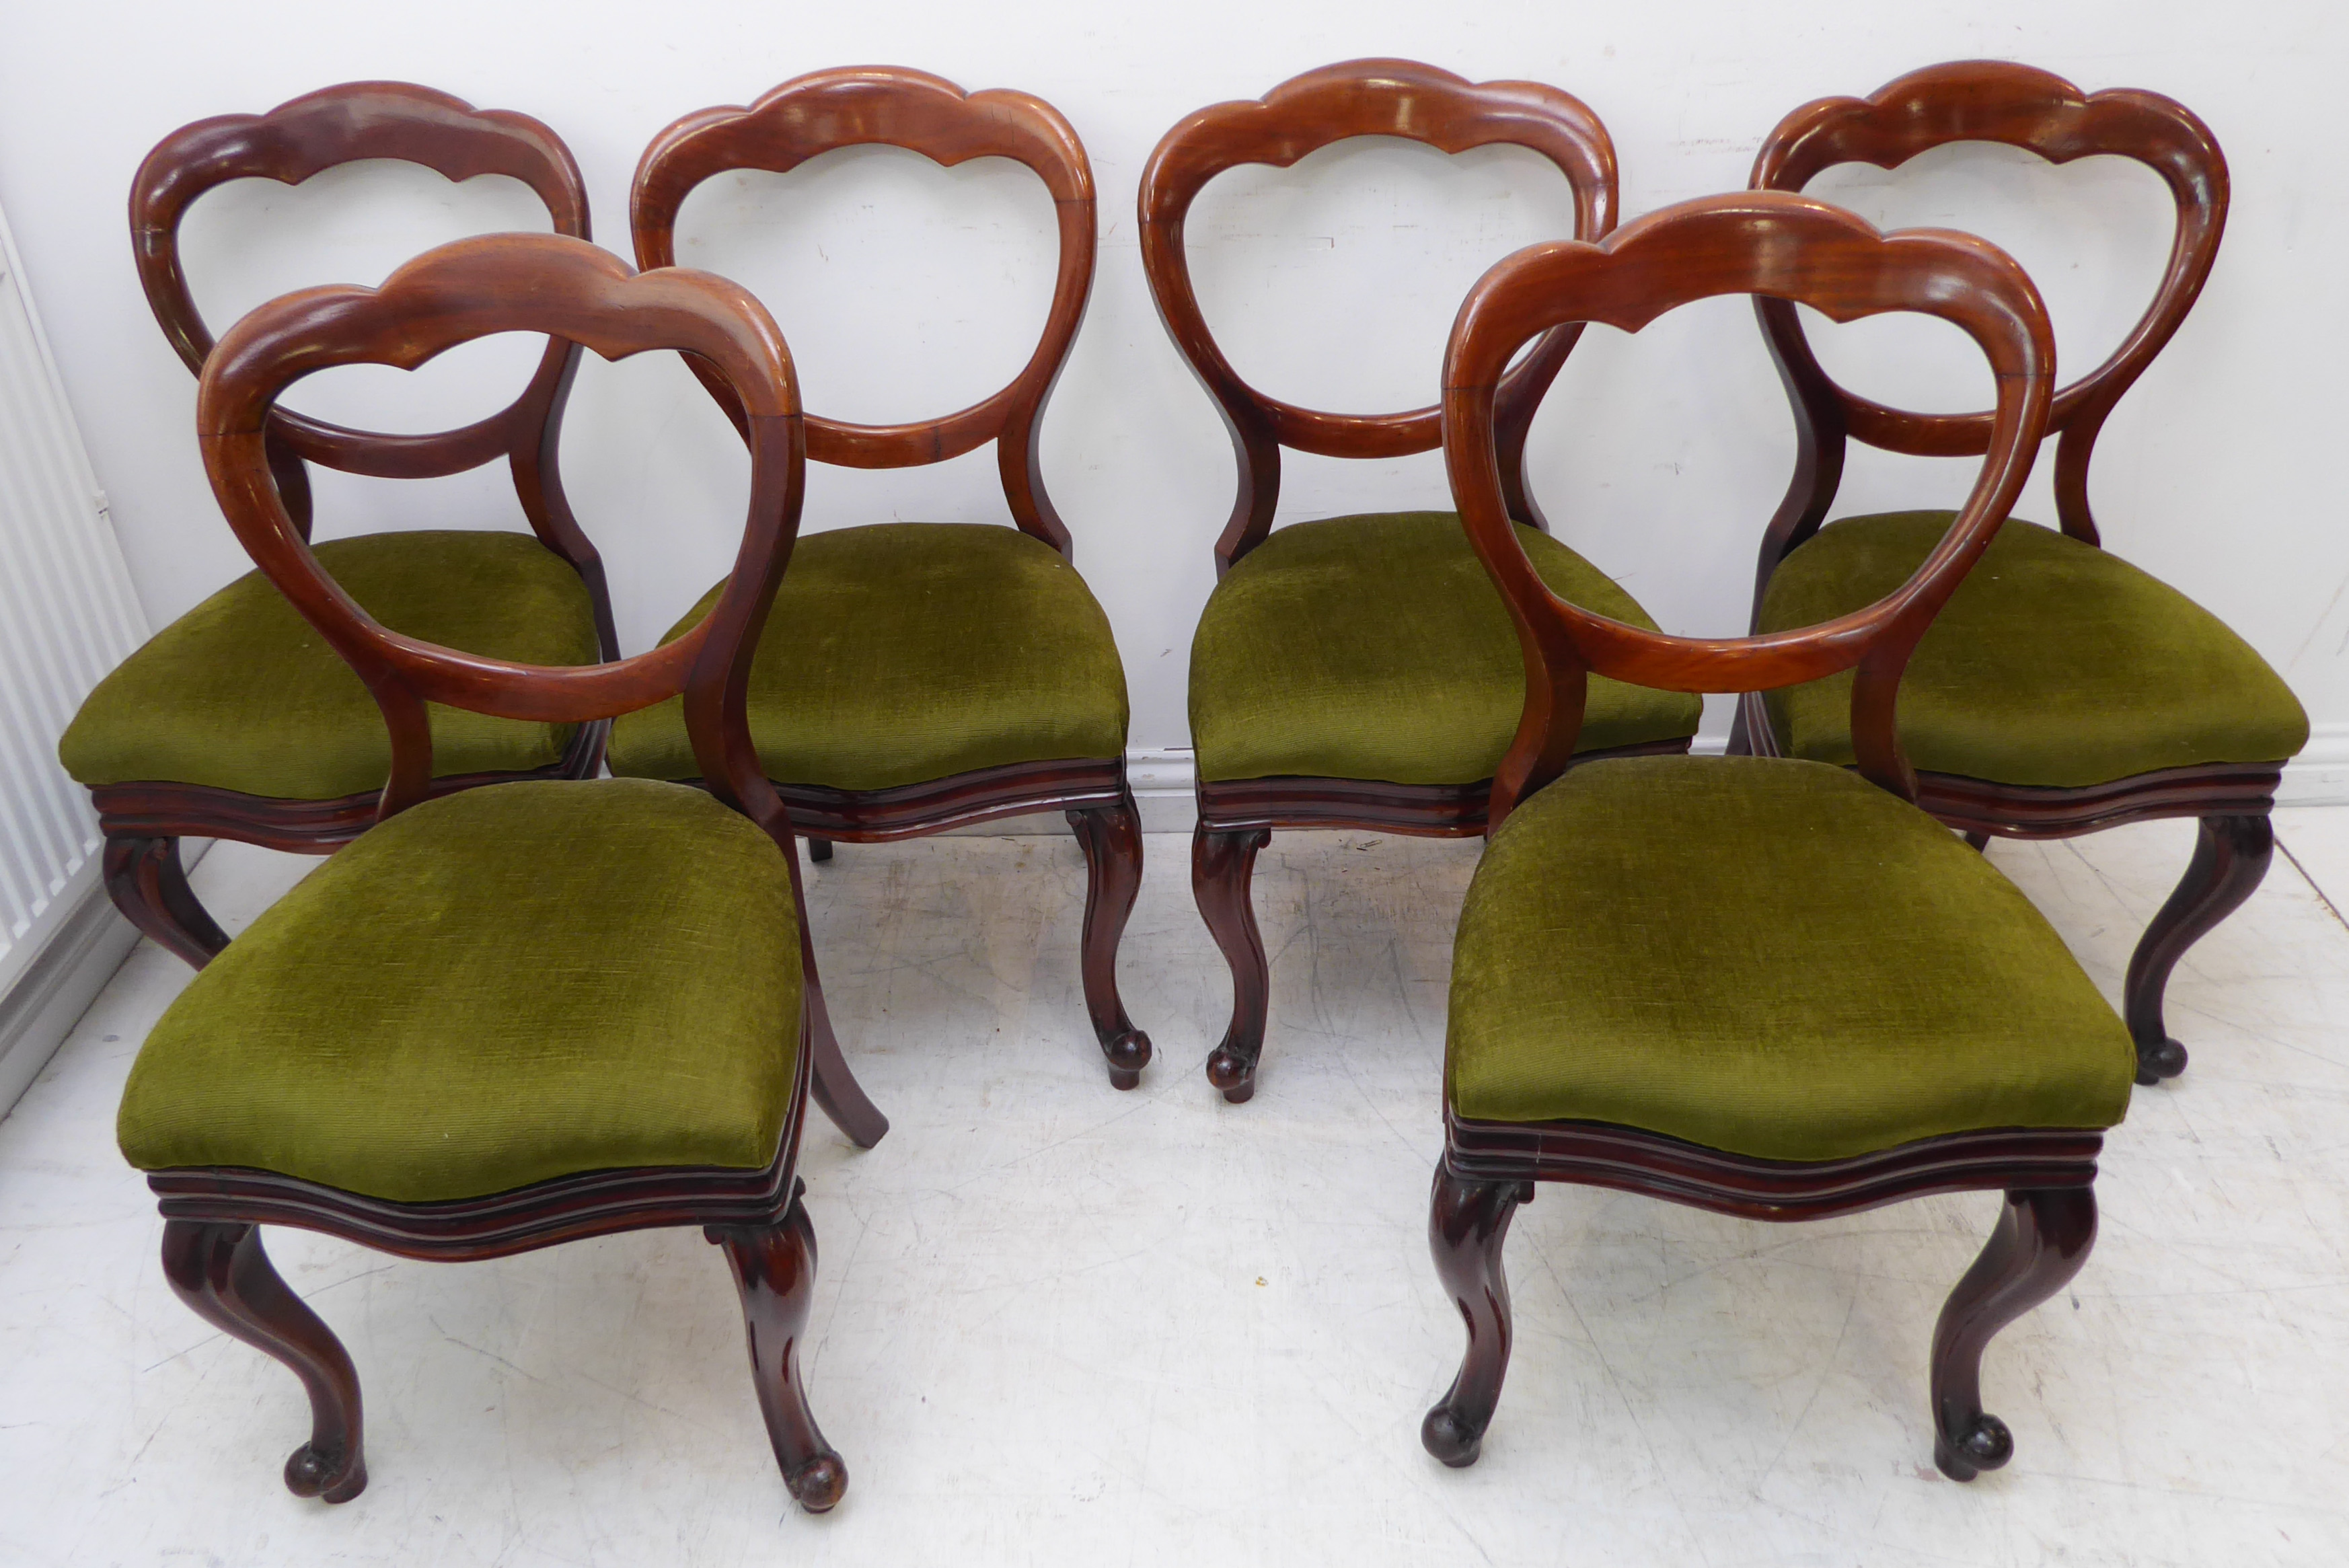 A harlequin set of eight mid-19th century mahogany balloon-back chairs: six with drop-in green